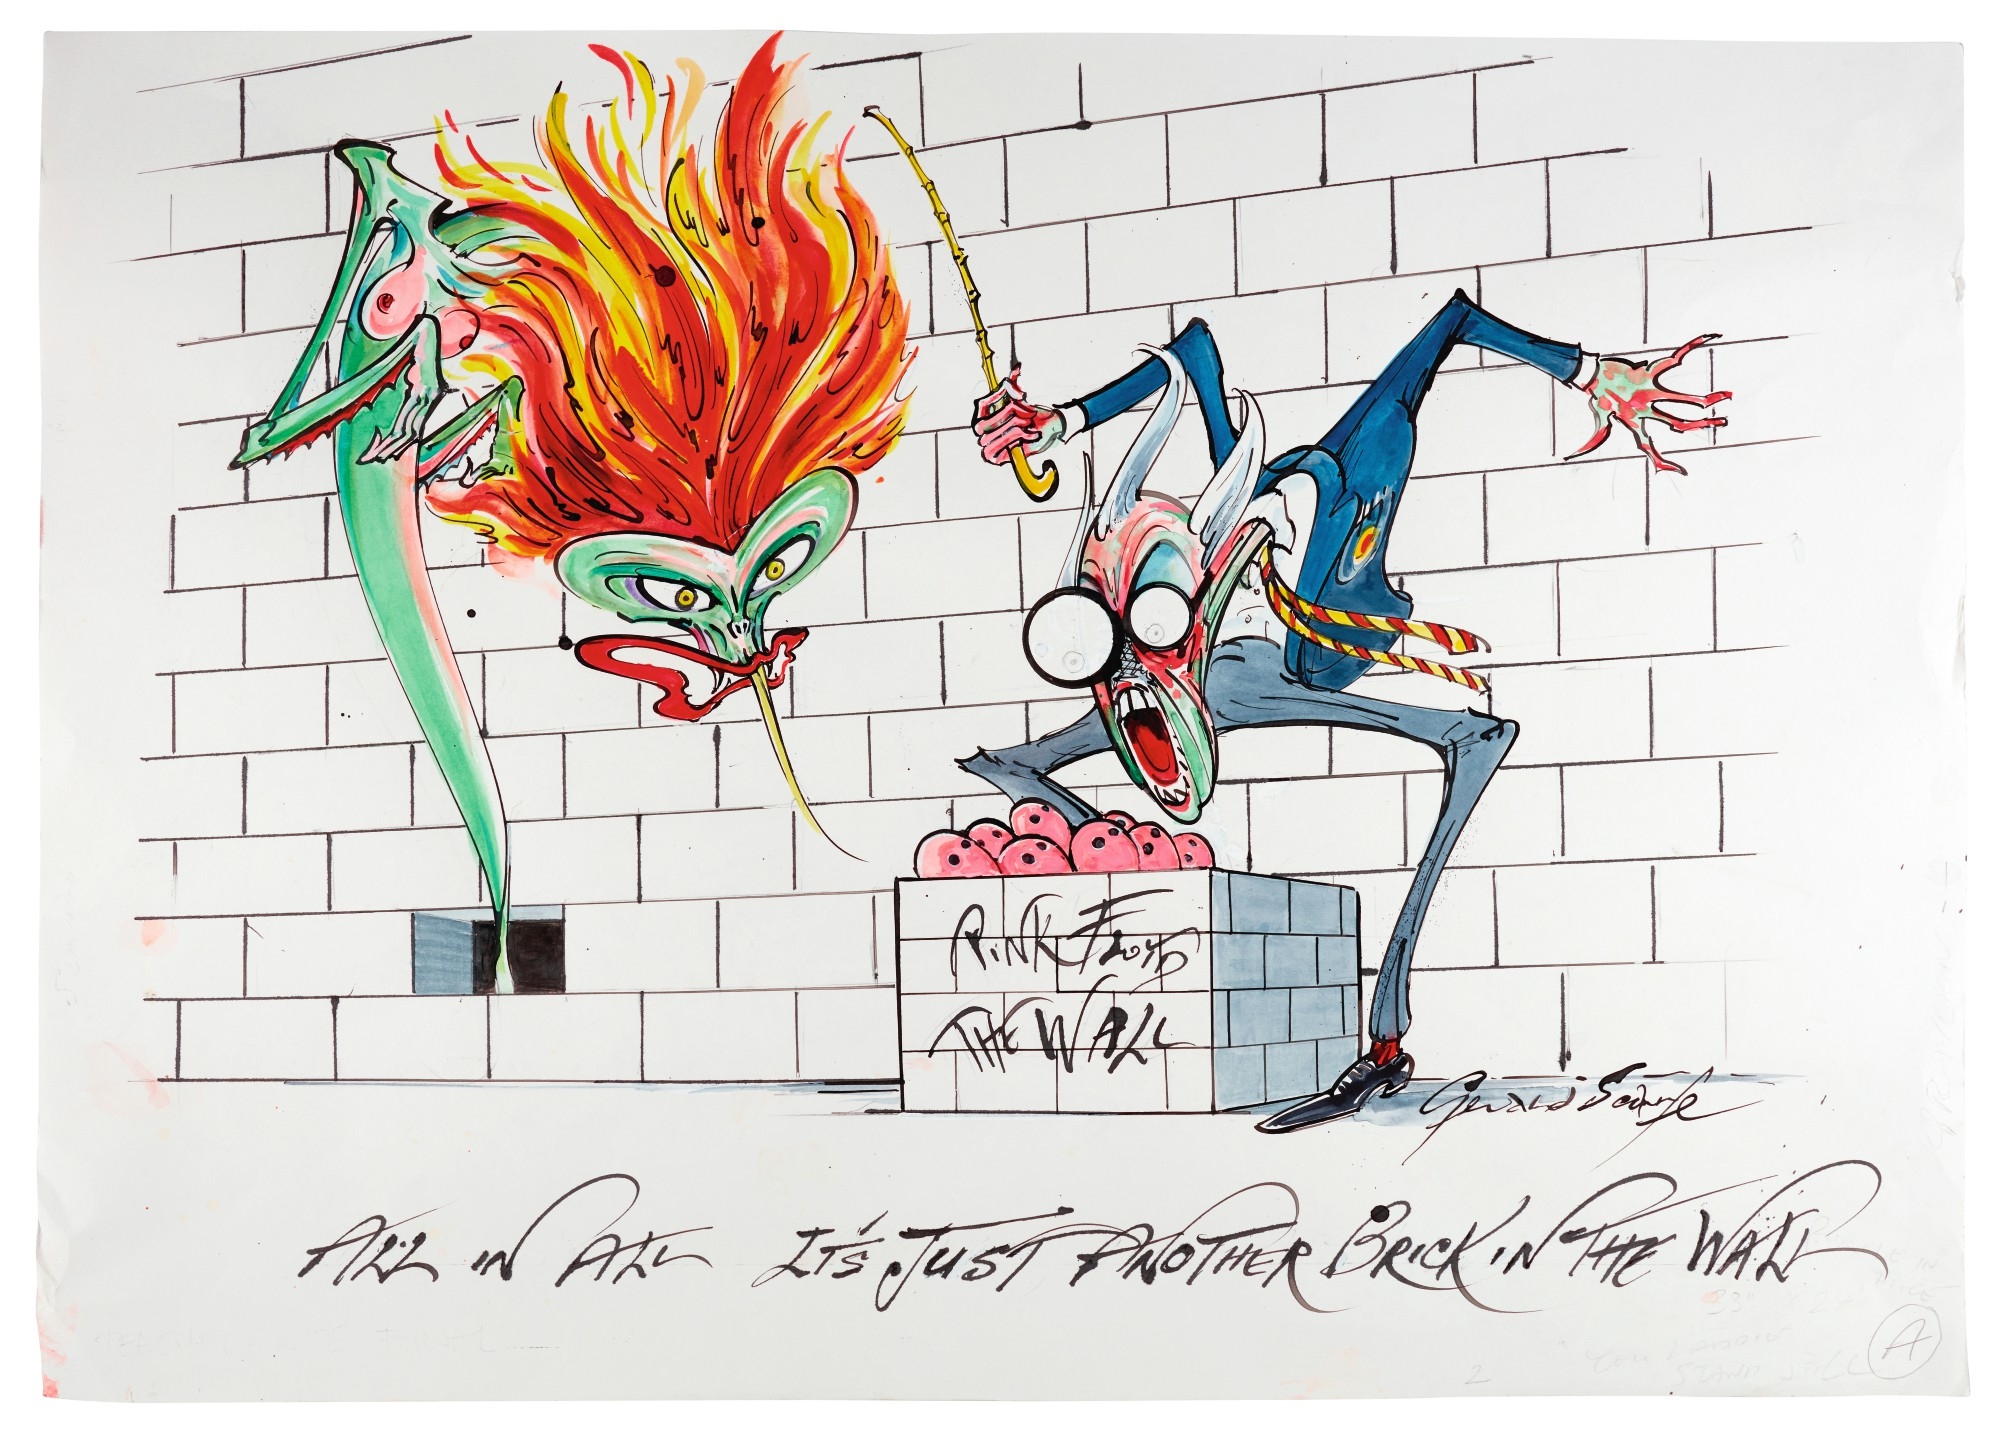 Gerald Scarfe, PINK FLOYD'S “THE WALL” – WIFE AND TEACHER